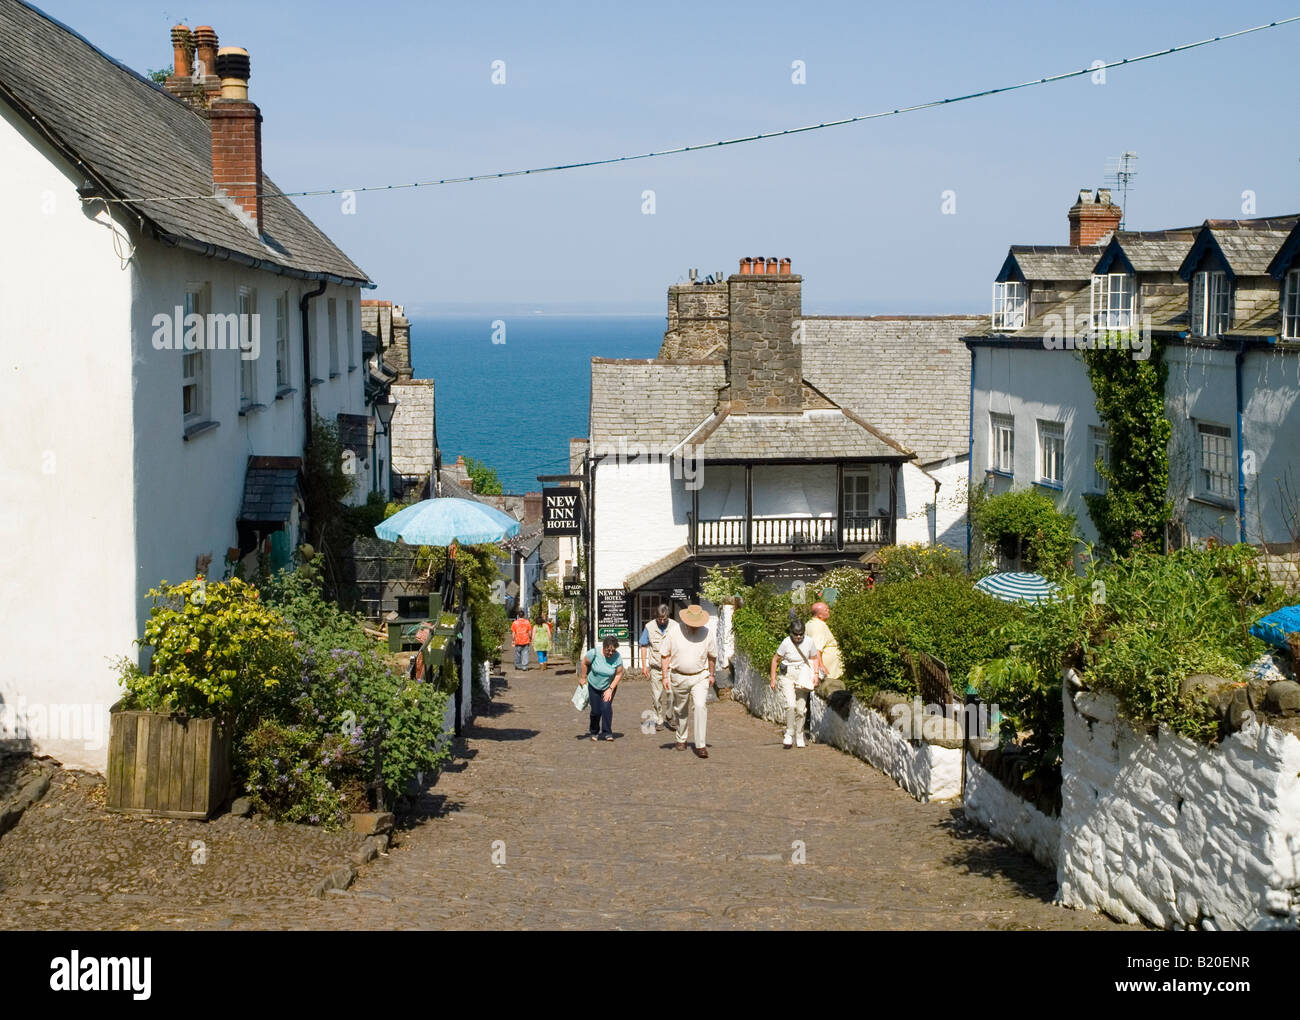 People walking up the steep cobbled street in the historic fishing village of Clovelly, North Devon England UK Stock Photo